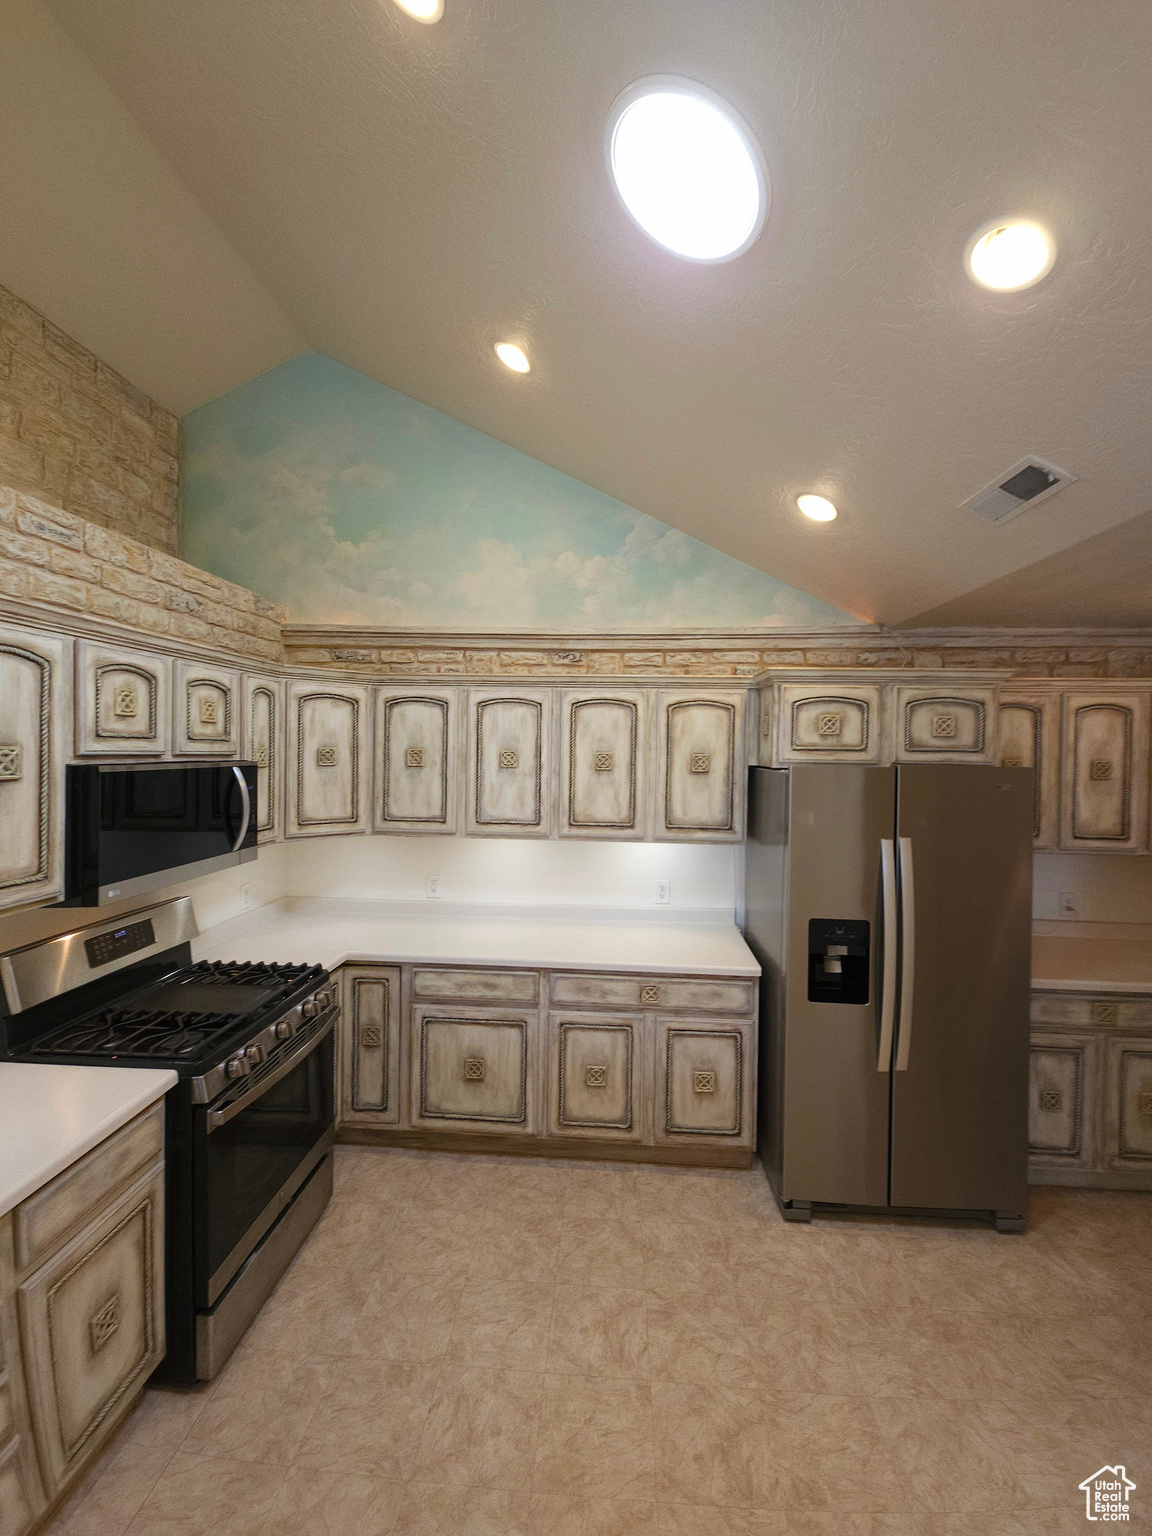 Custom hand-finished cabinets continue the elegance into the kitchen, nestled under a hand-painted sky and clouds mural.